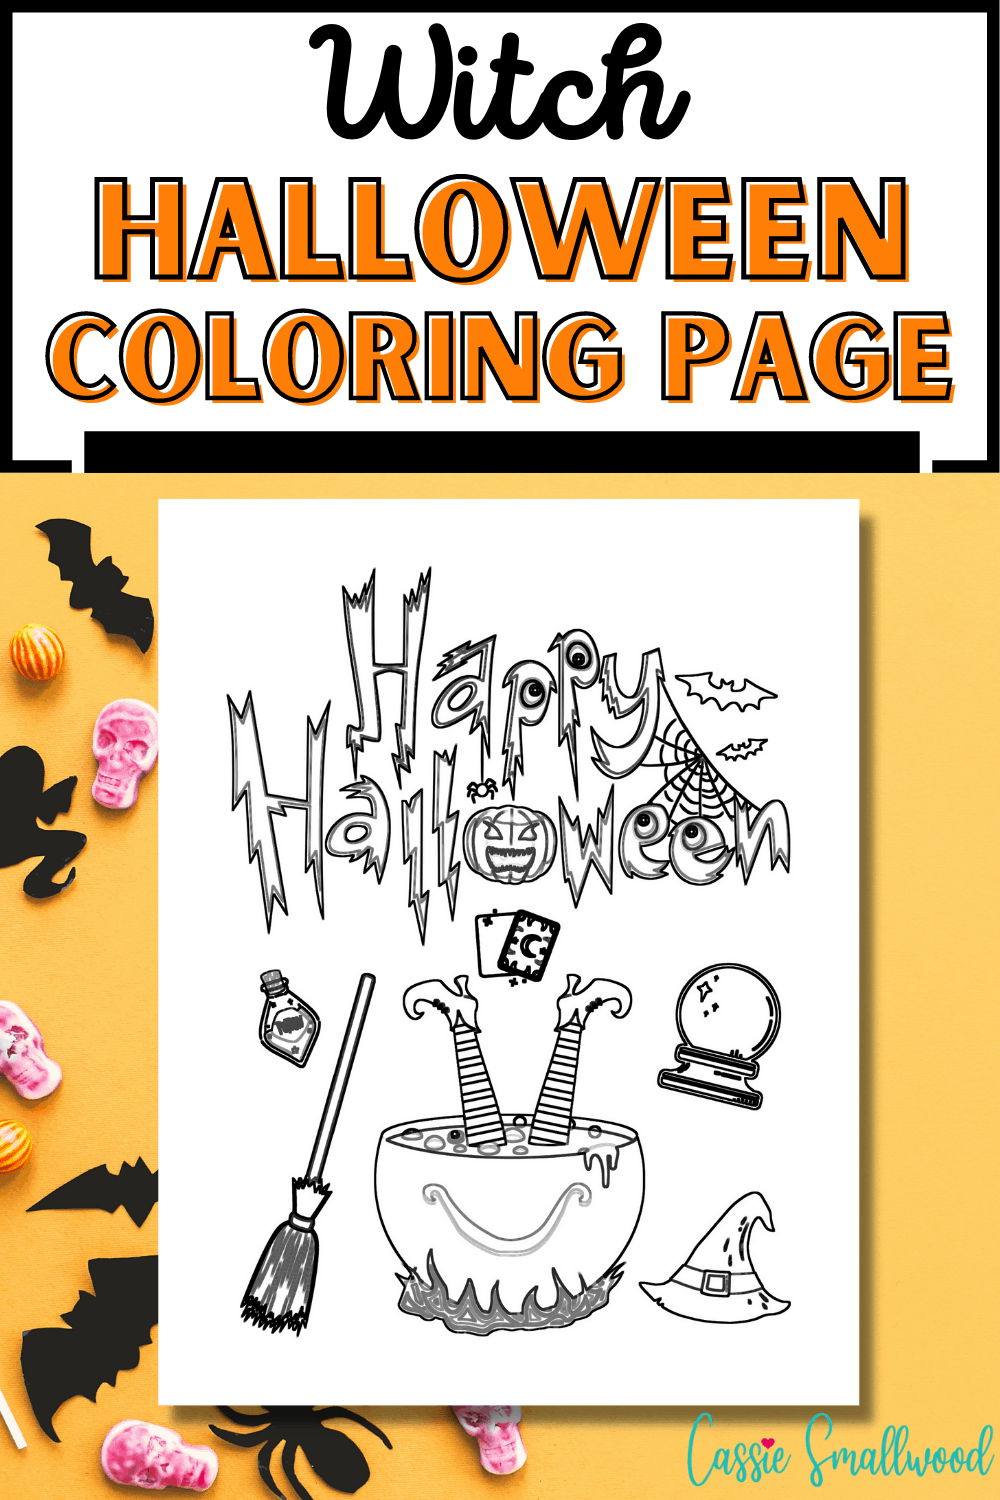 Witch Halloween Coloring Page For Kids